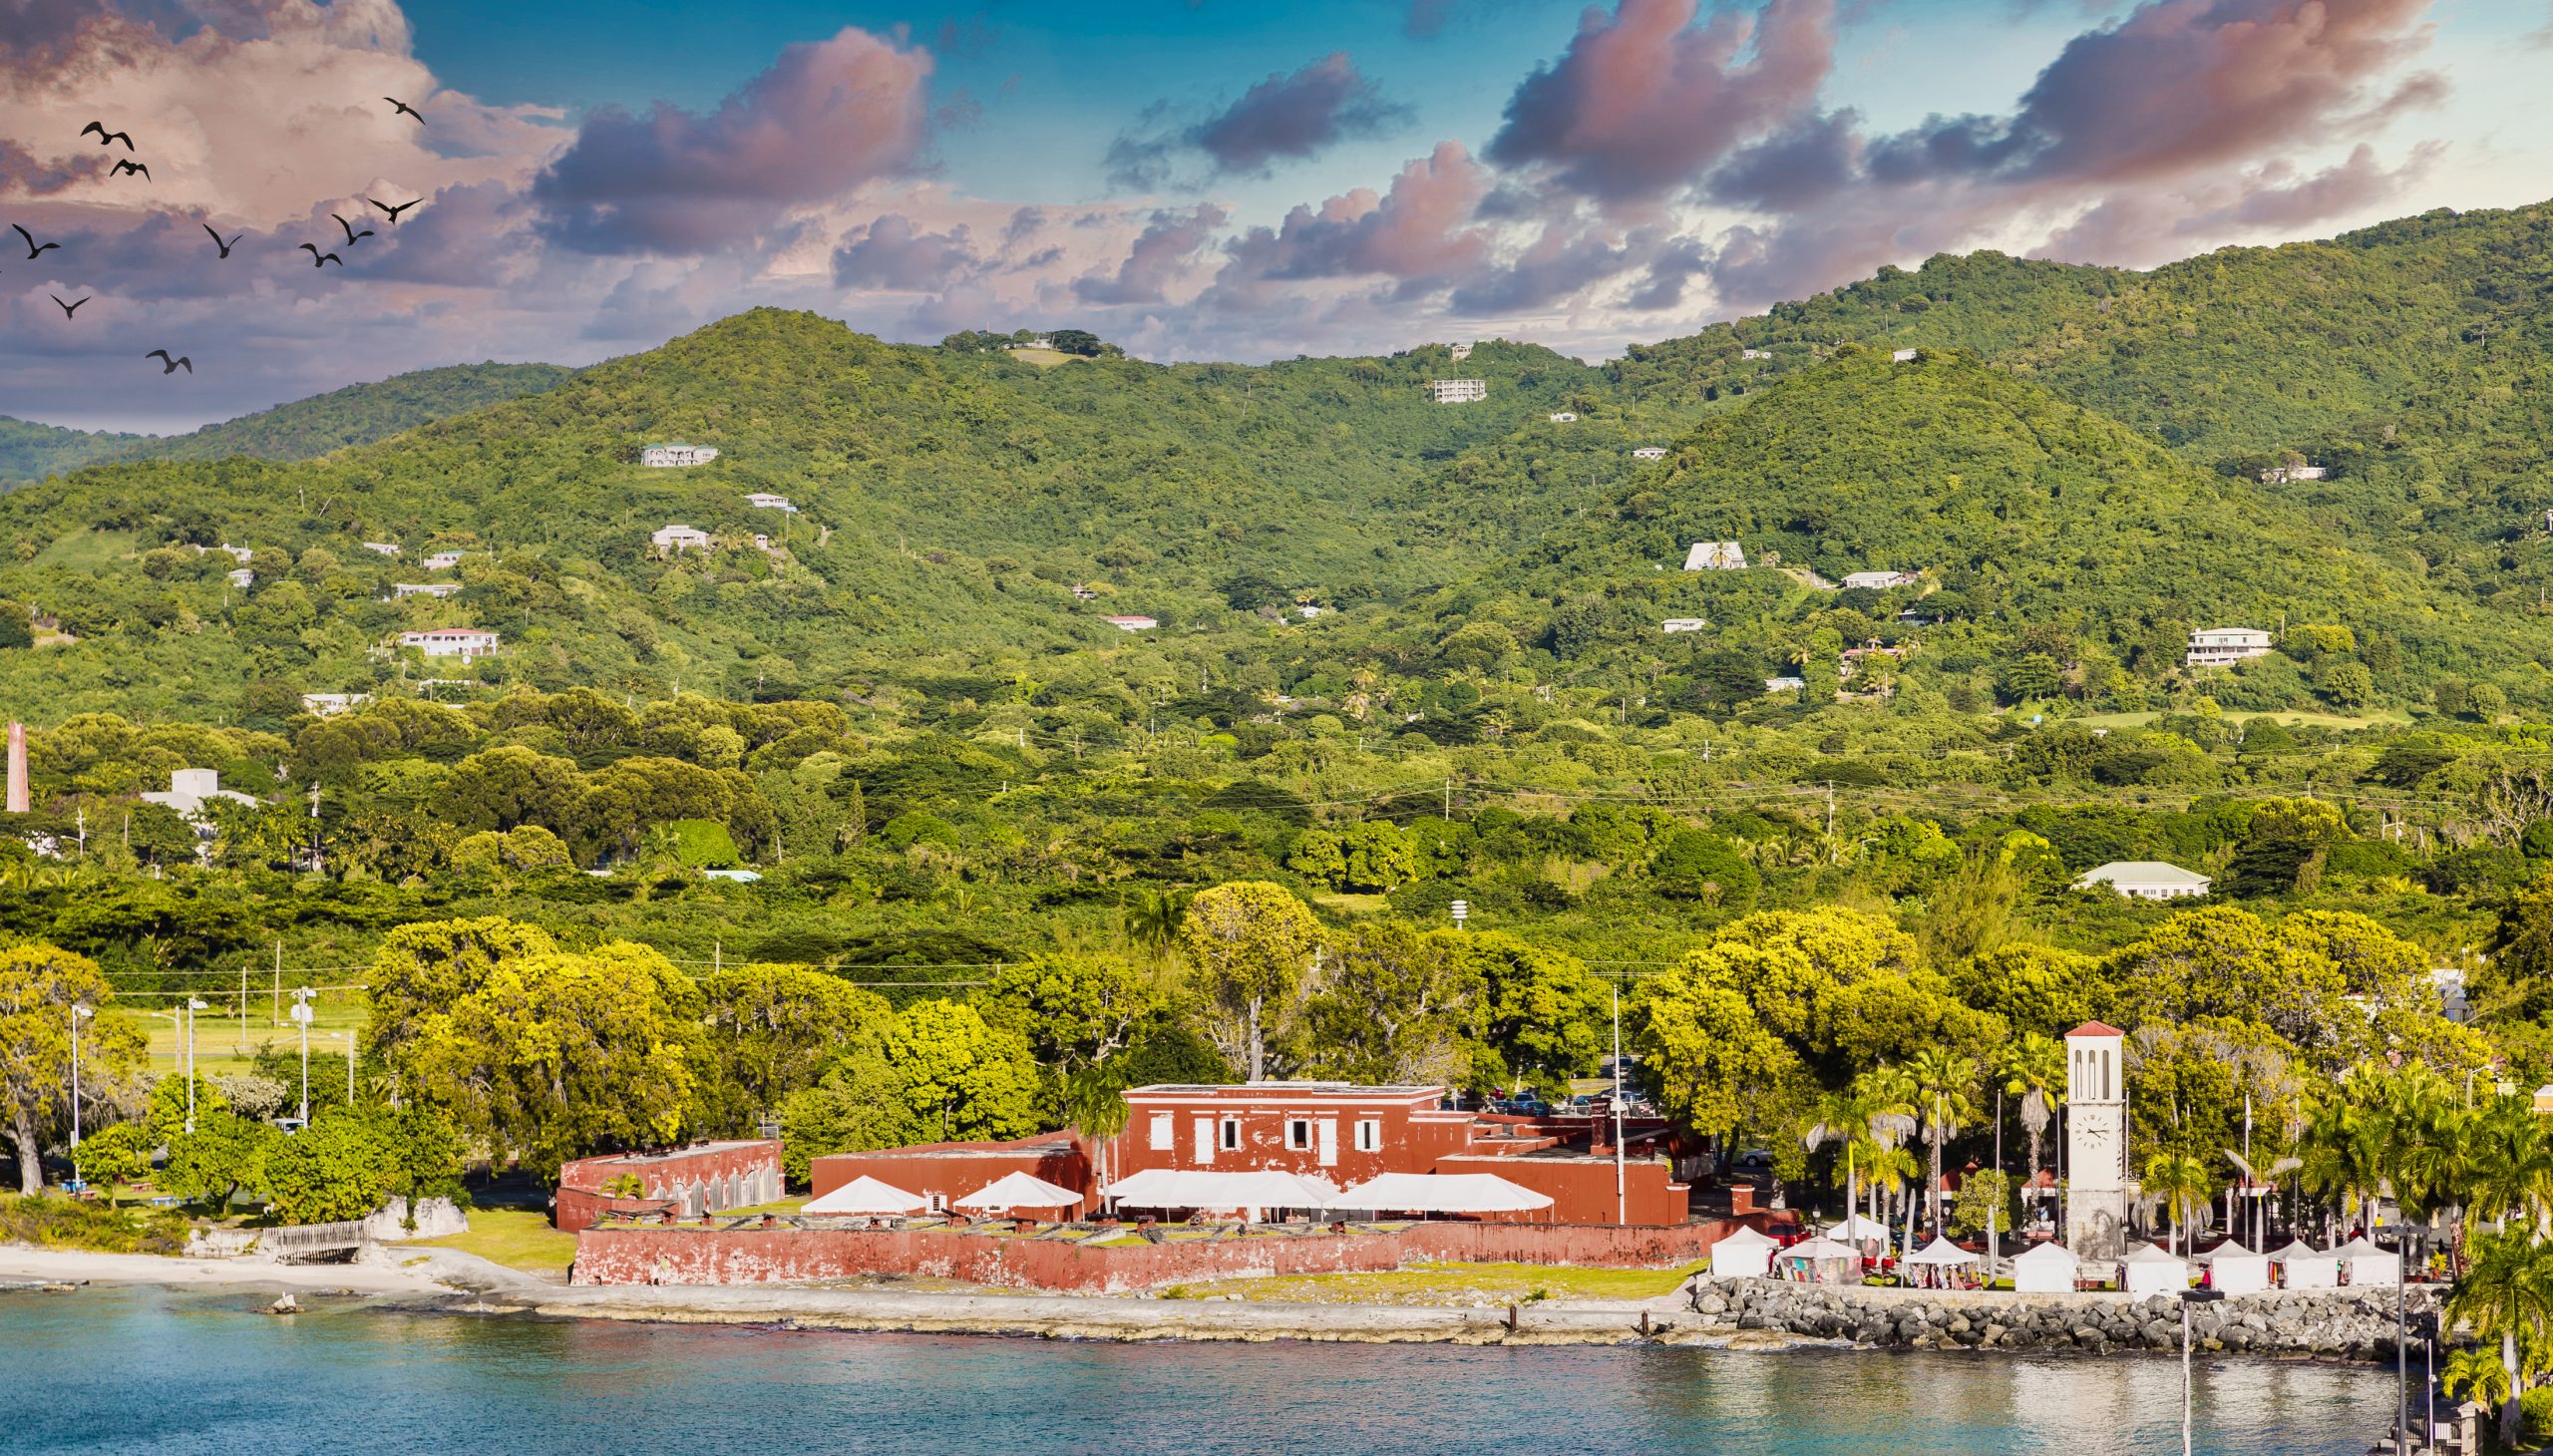 Cruise Destinations - Experience the Caribbean Island of St Croix on a Royal Caribbean Cruise